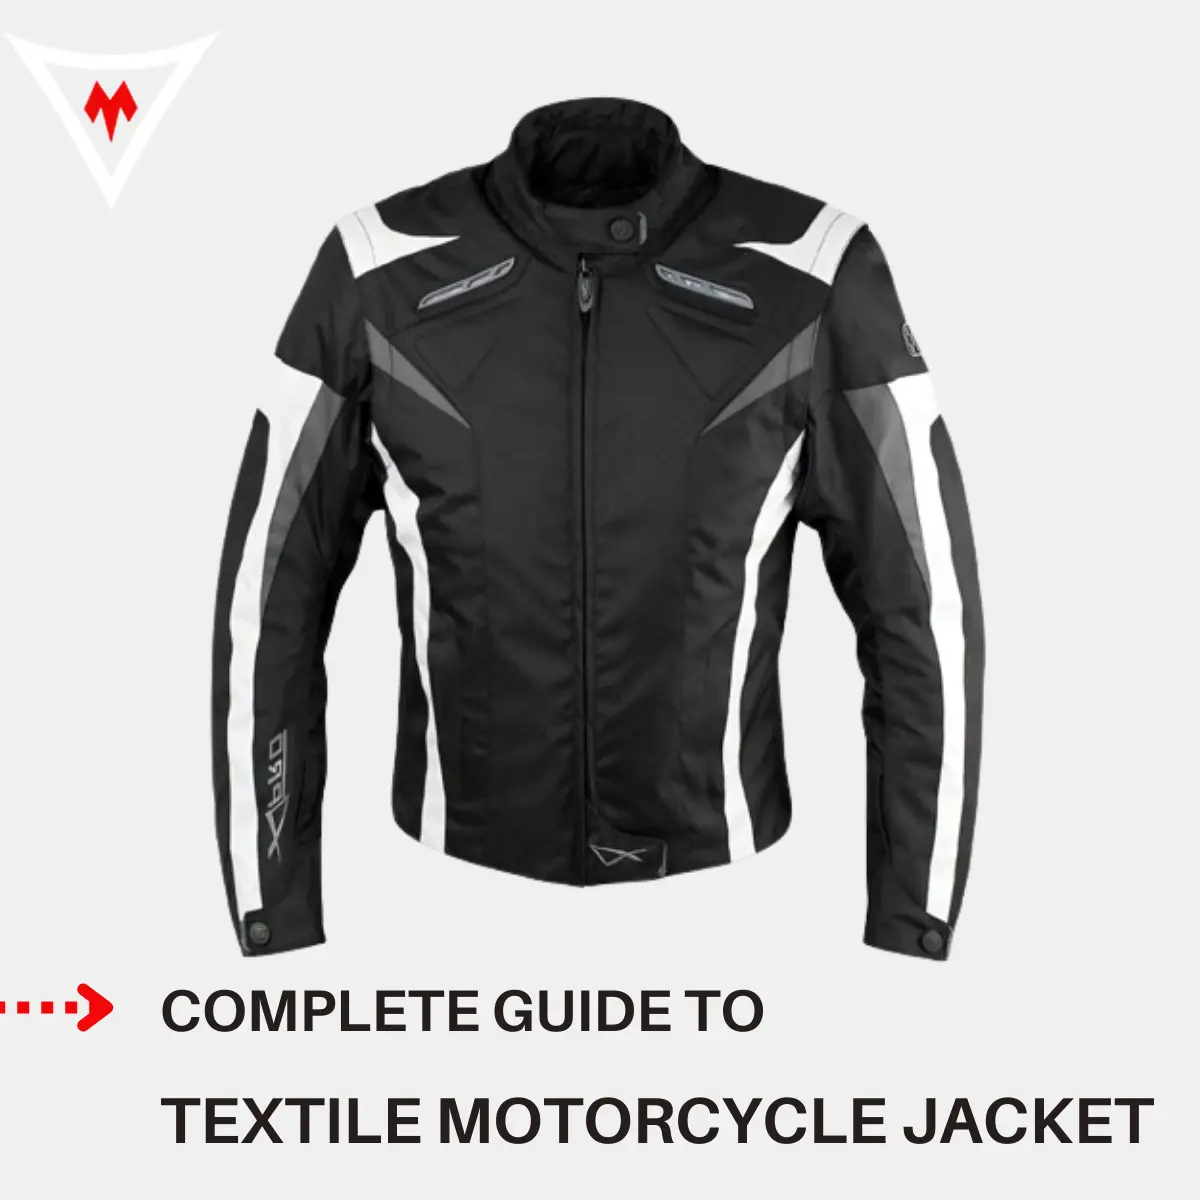 A complete guide to textile motorcycle jacket